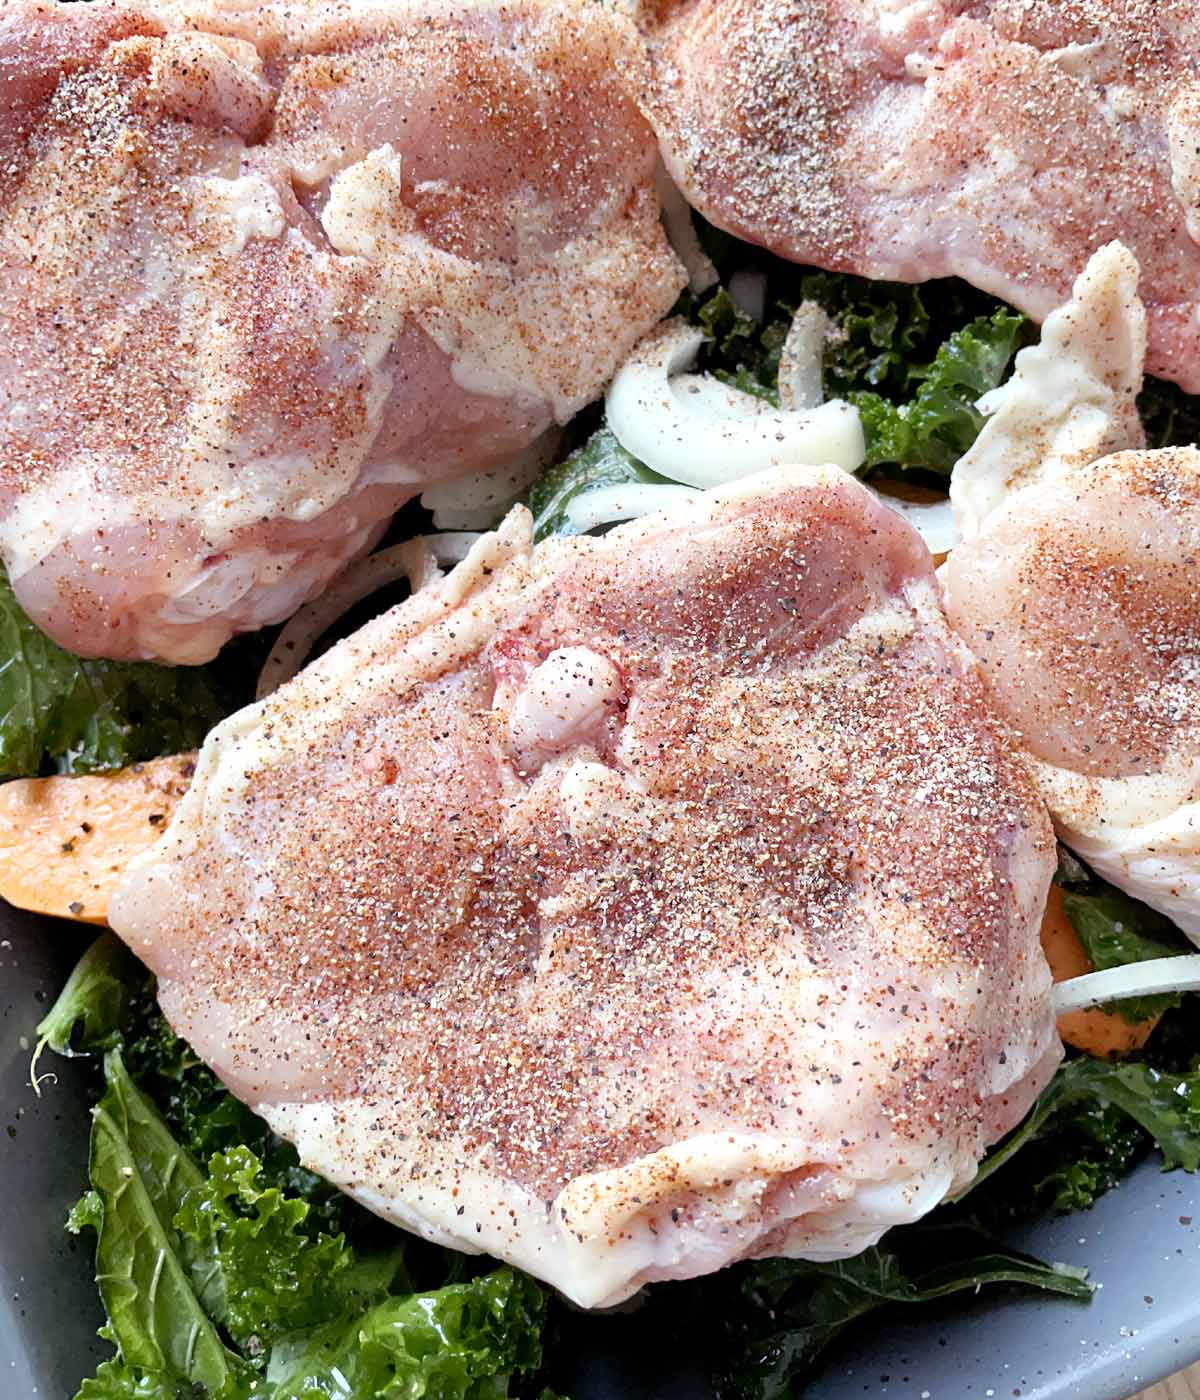 Raw chicken pieces with dry seasonings on them, resting on a bed of uncooked vegetables in a roasting pan.